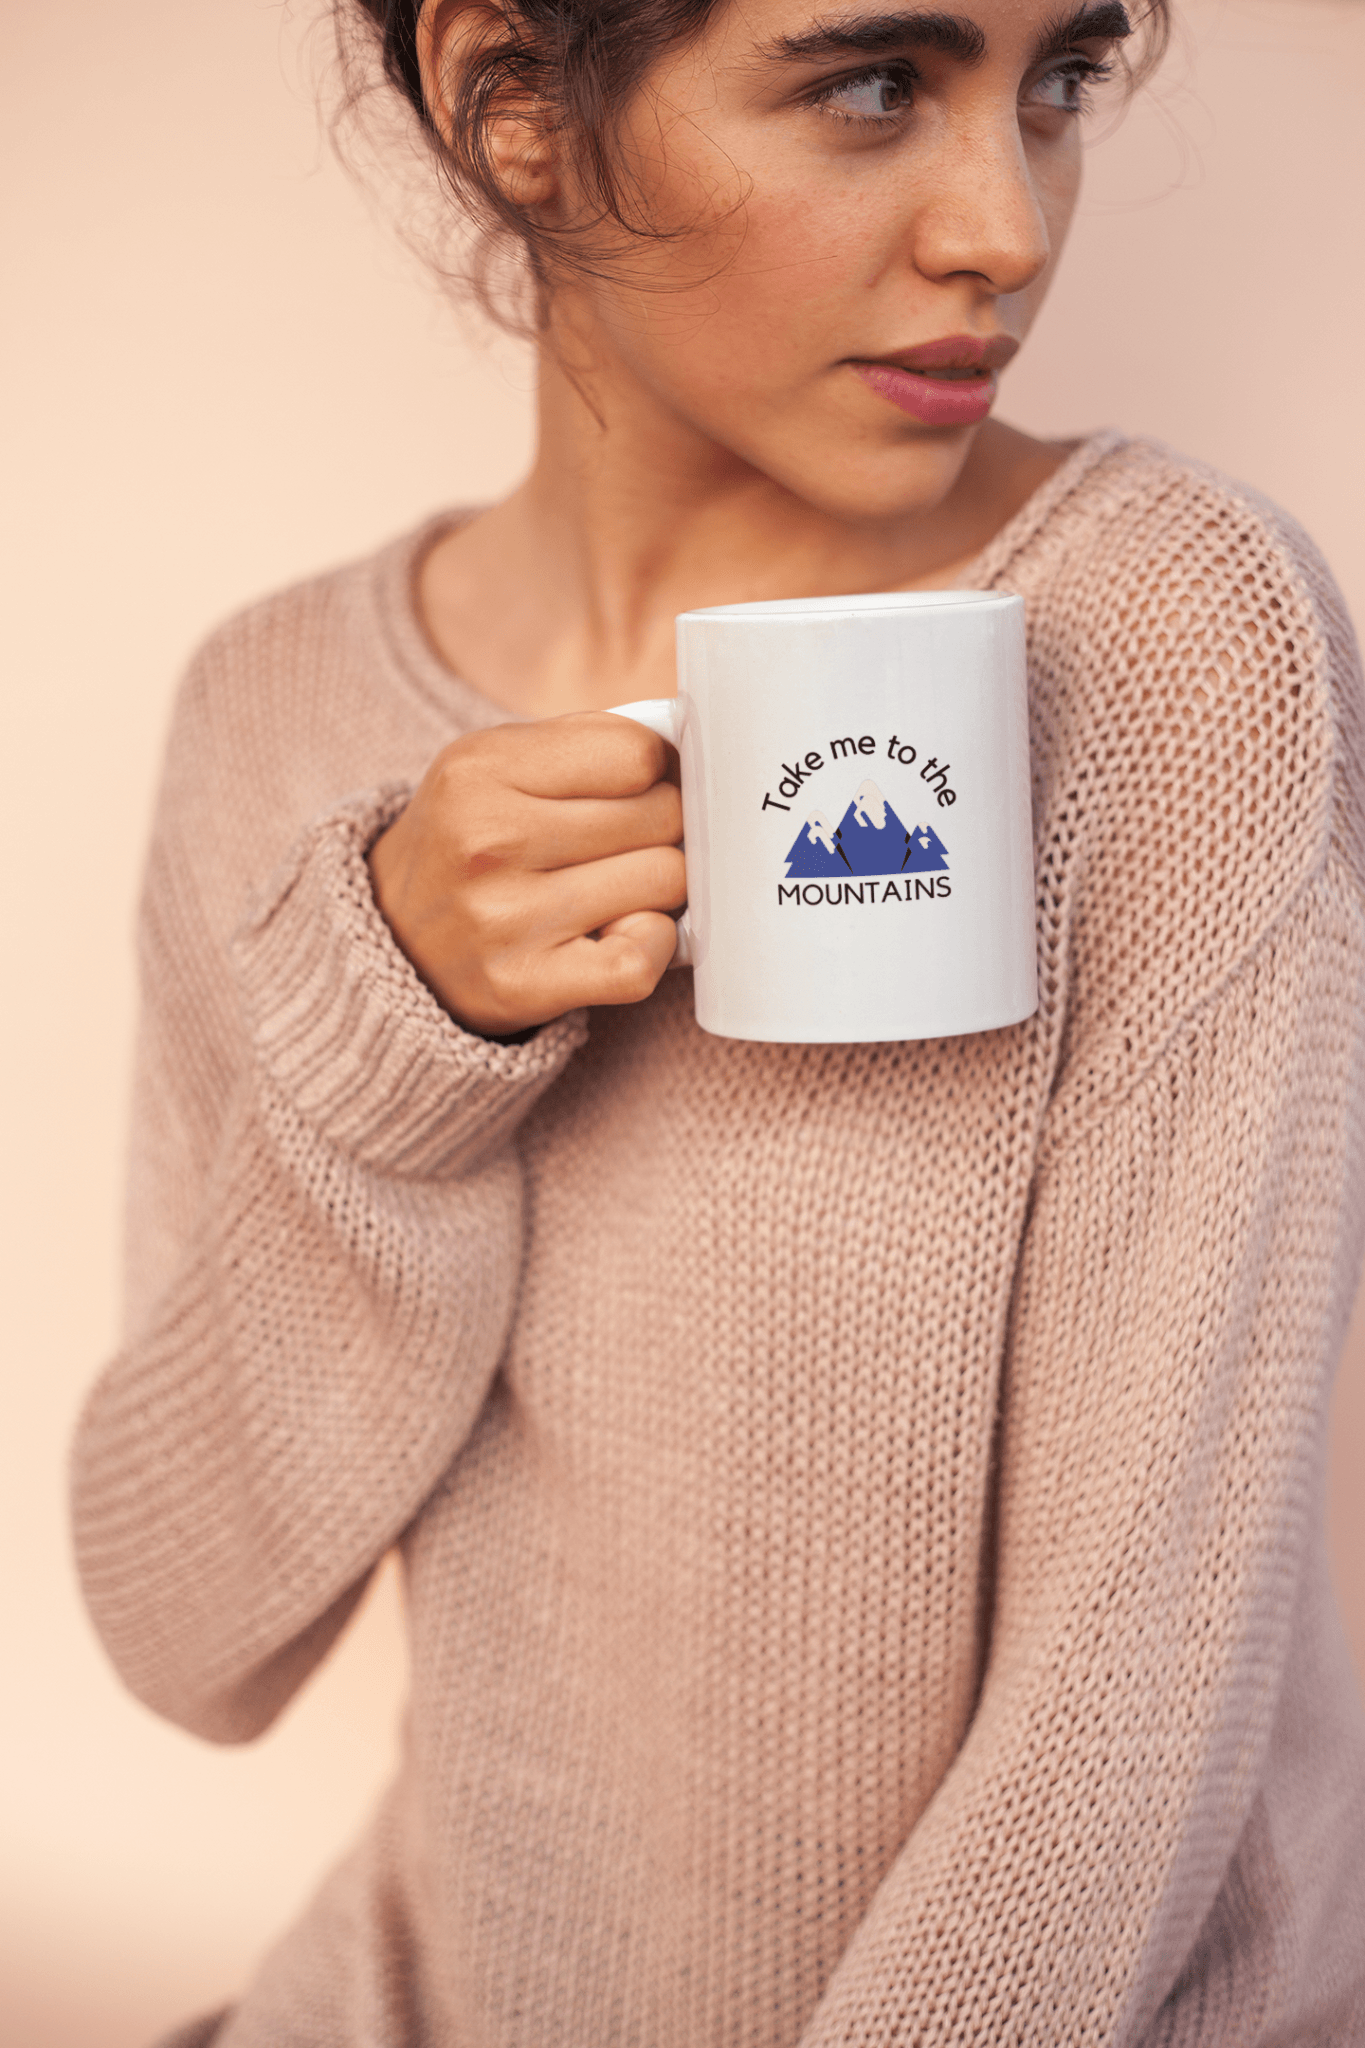 Woman wearing a cozy sweater holding a white ceramic coffee cup.